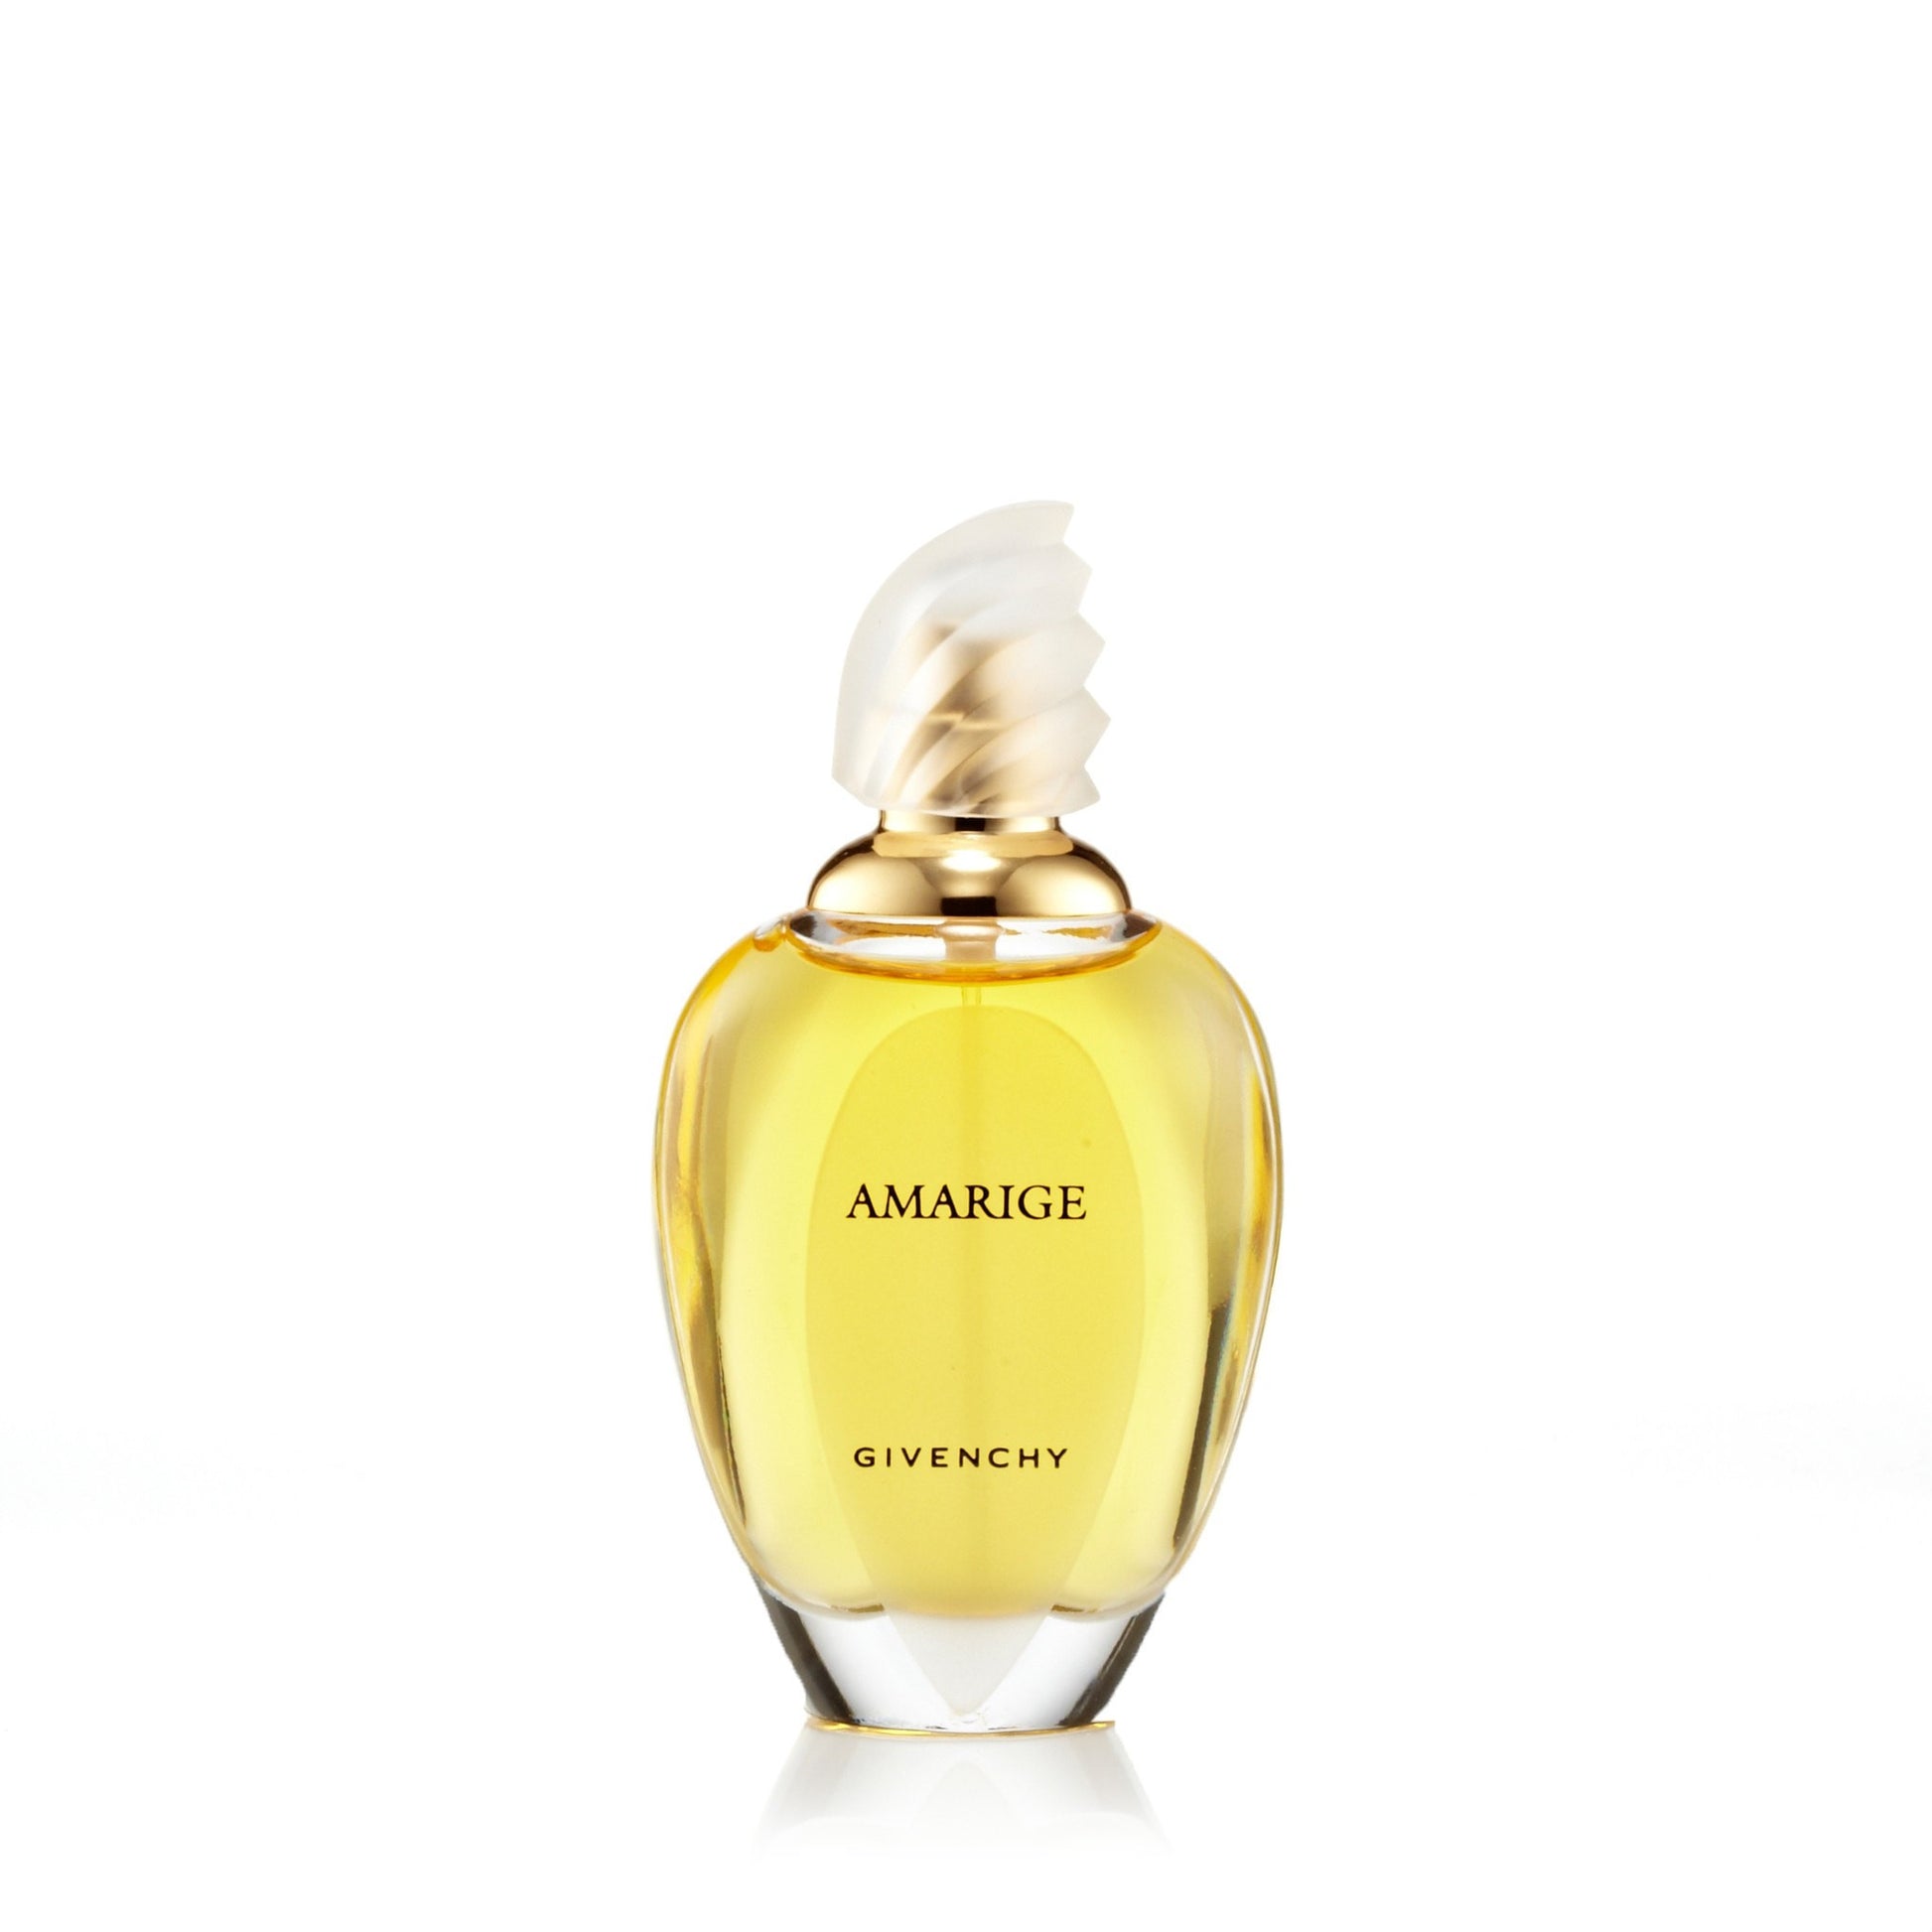 Amarige Eau de Toilette Spray for Women by Givenchy 1.7 oz. Click to open in modal